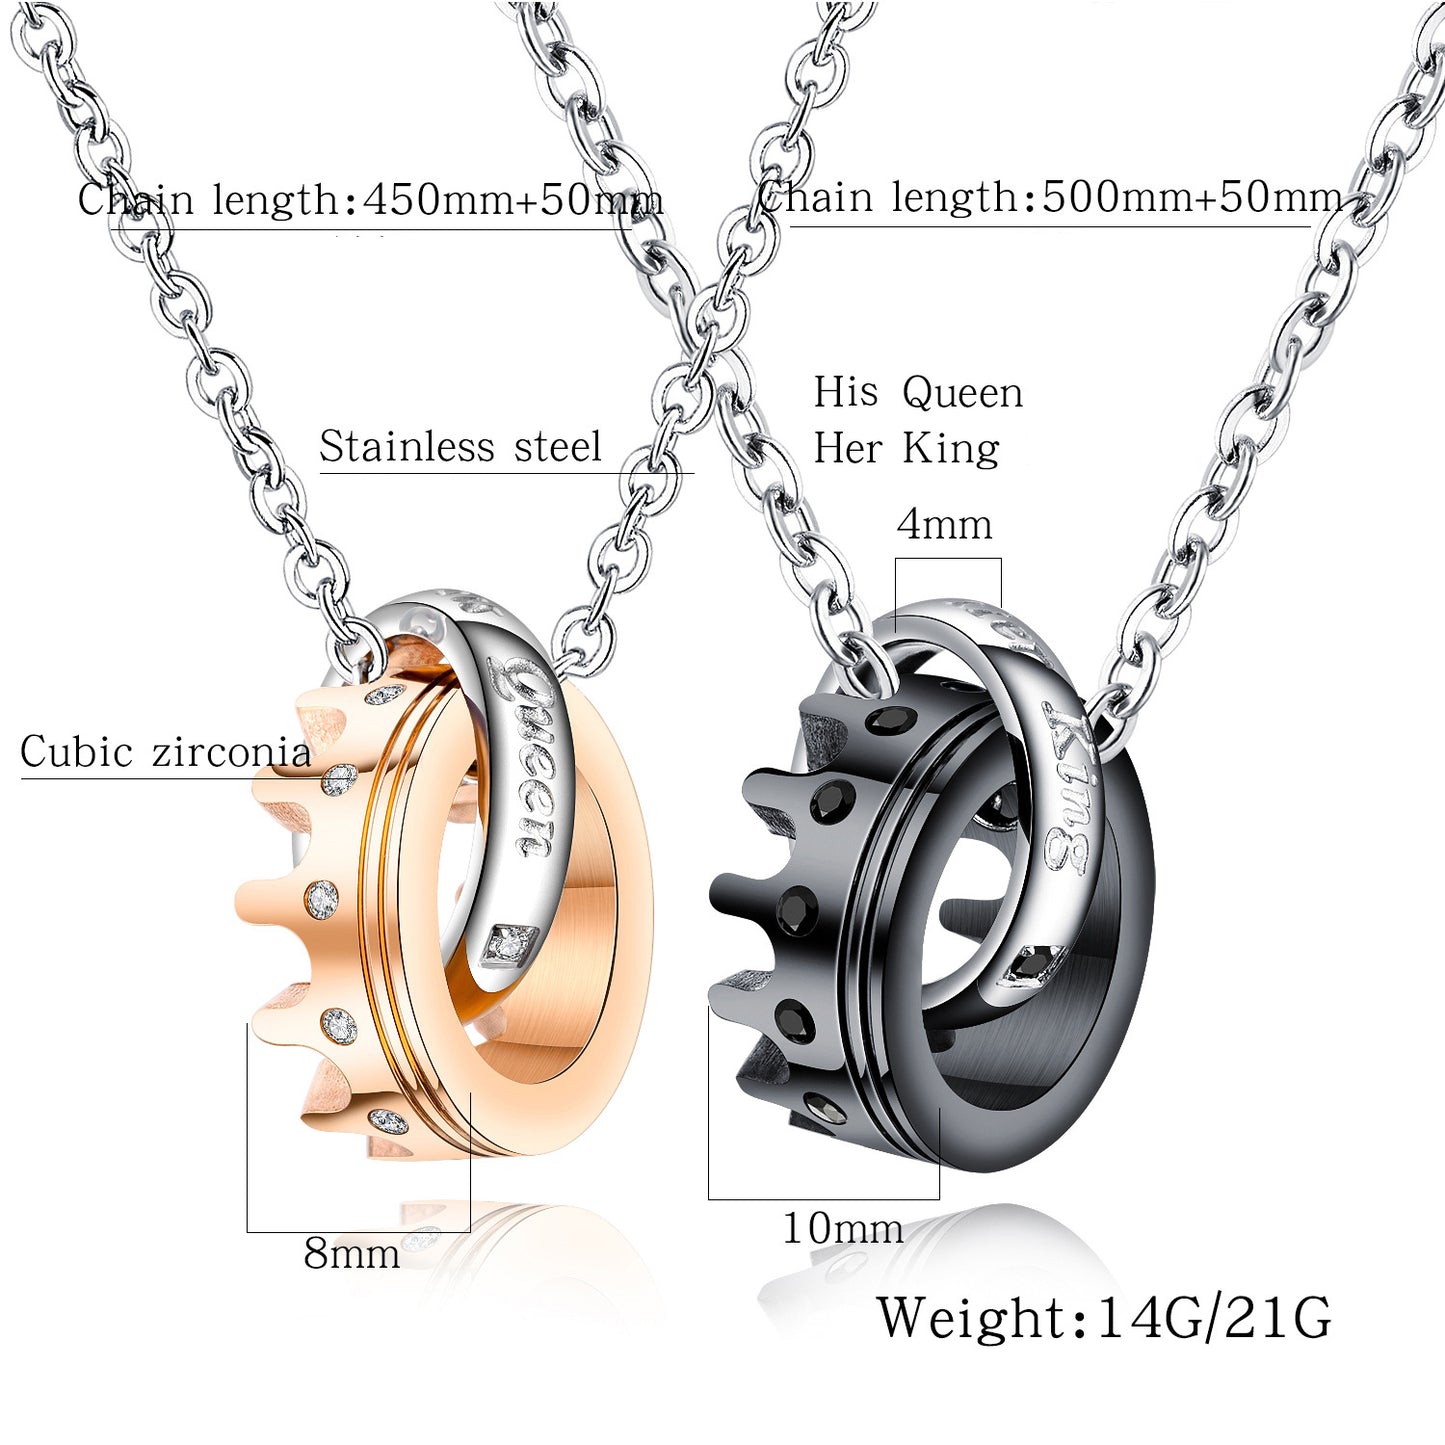 His Queen Her King Titanium Couples Valentine's Day Gift Necklace With Diamond Crown Pendant Tanabata Necklace - LiveLaughlove